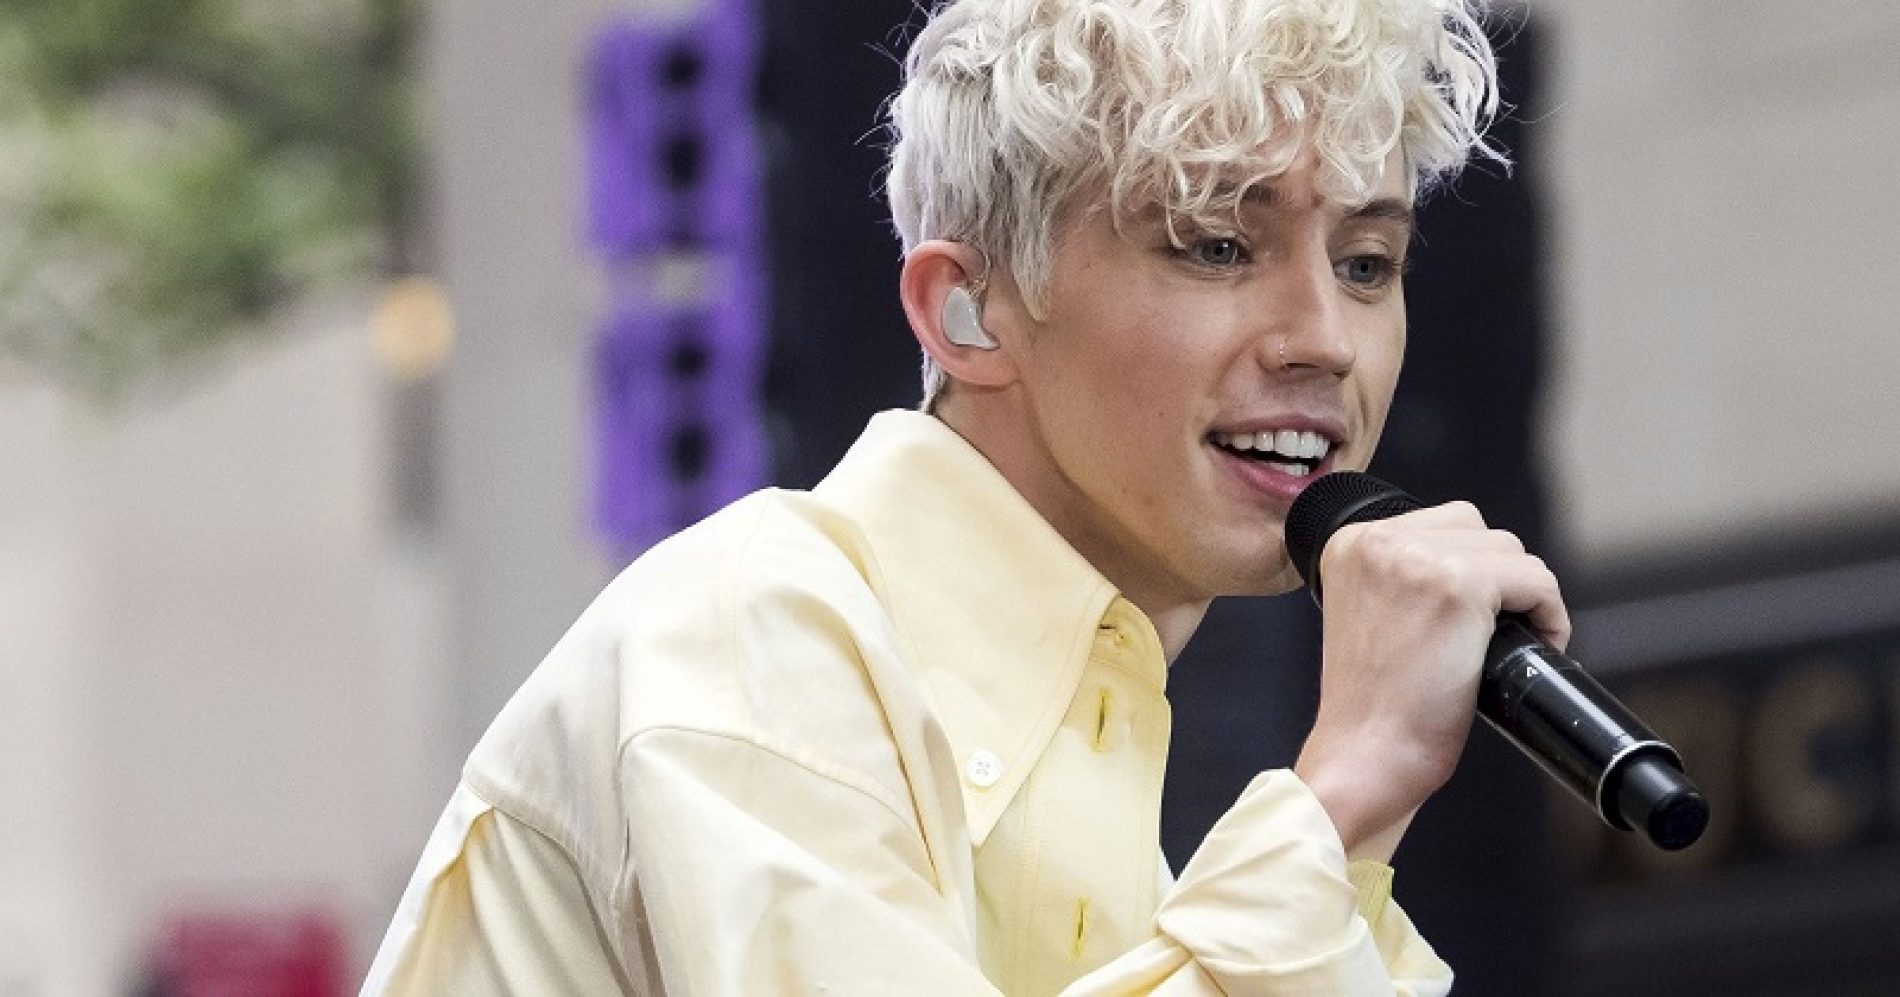 “I Wonder If I Would Be More Commercially Successful If I Wasn’t Gay.” – Troye Sivan